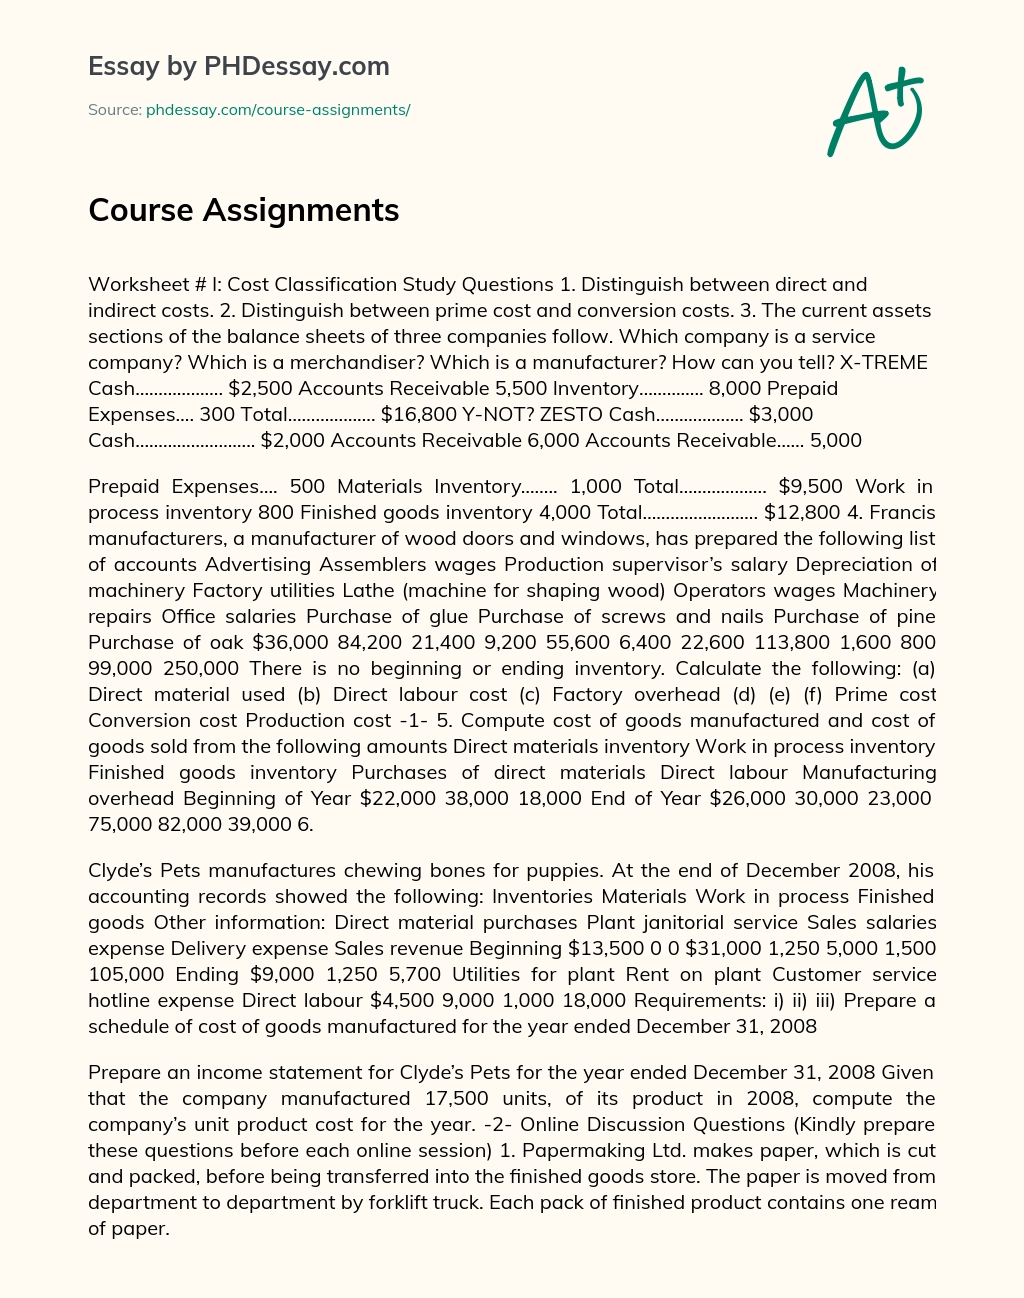 Course Assignments essay